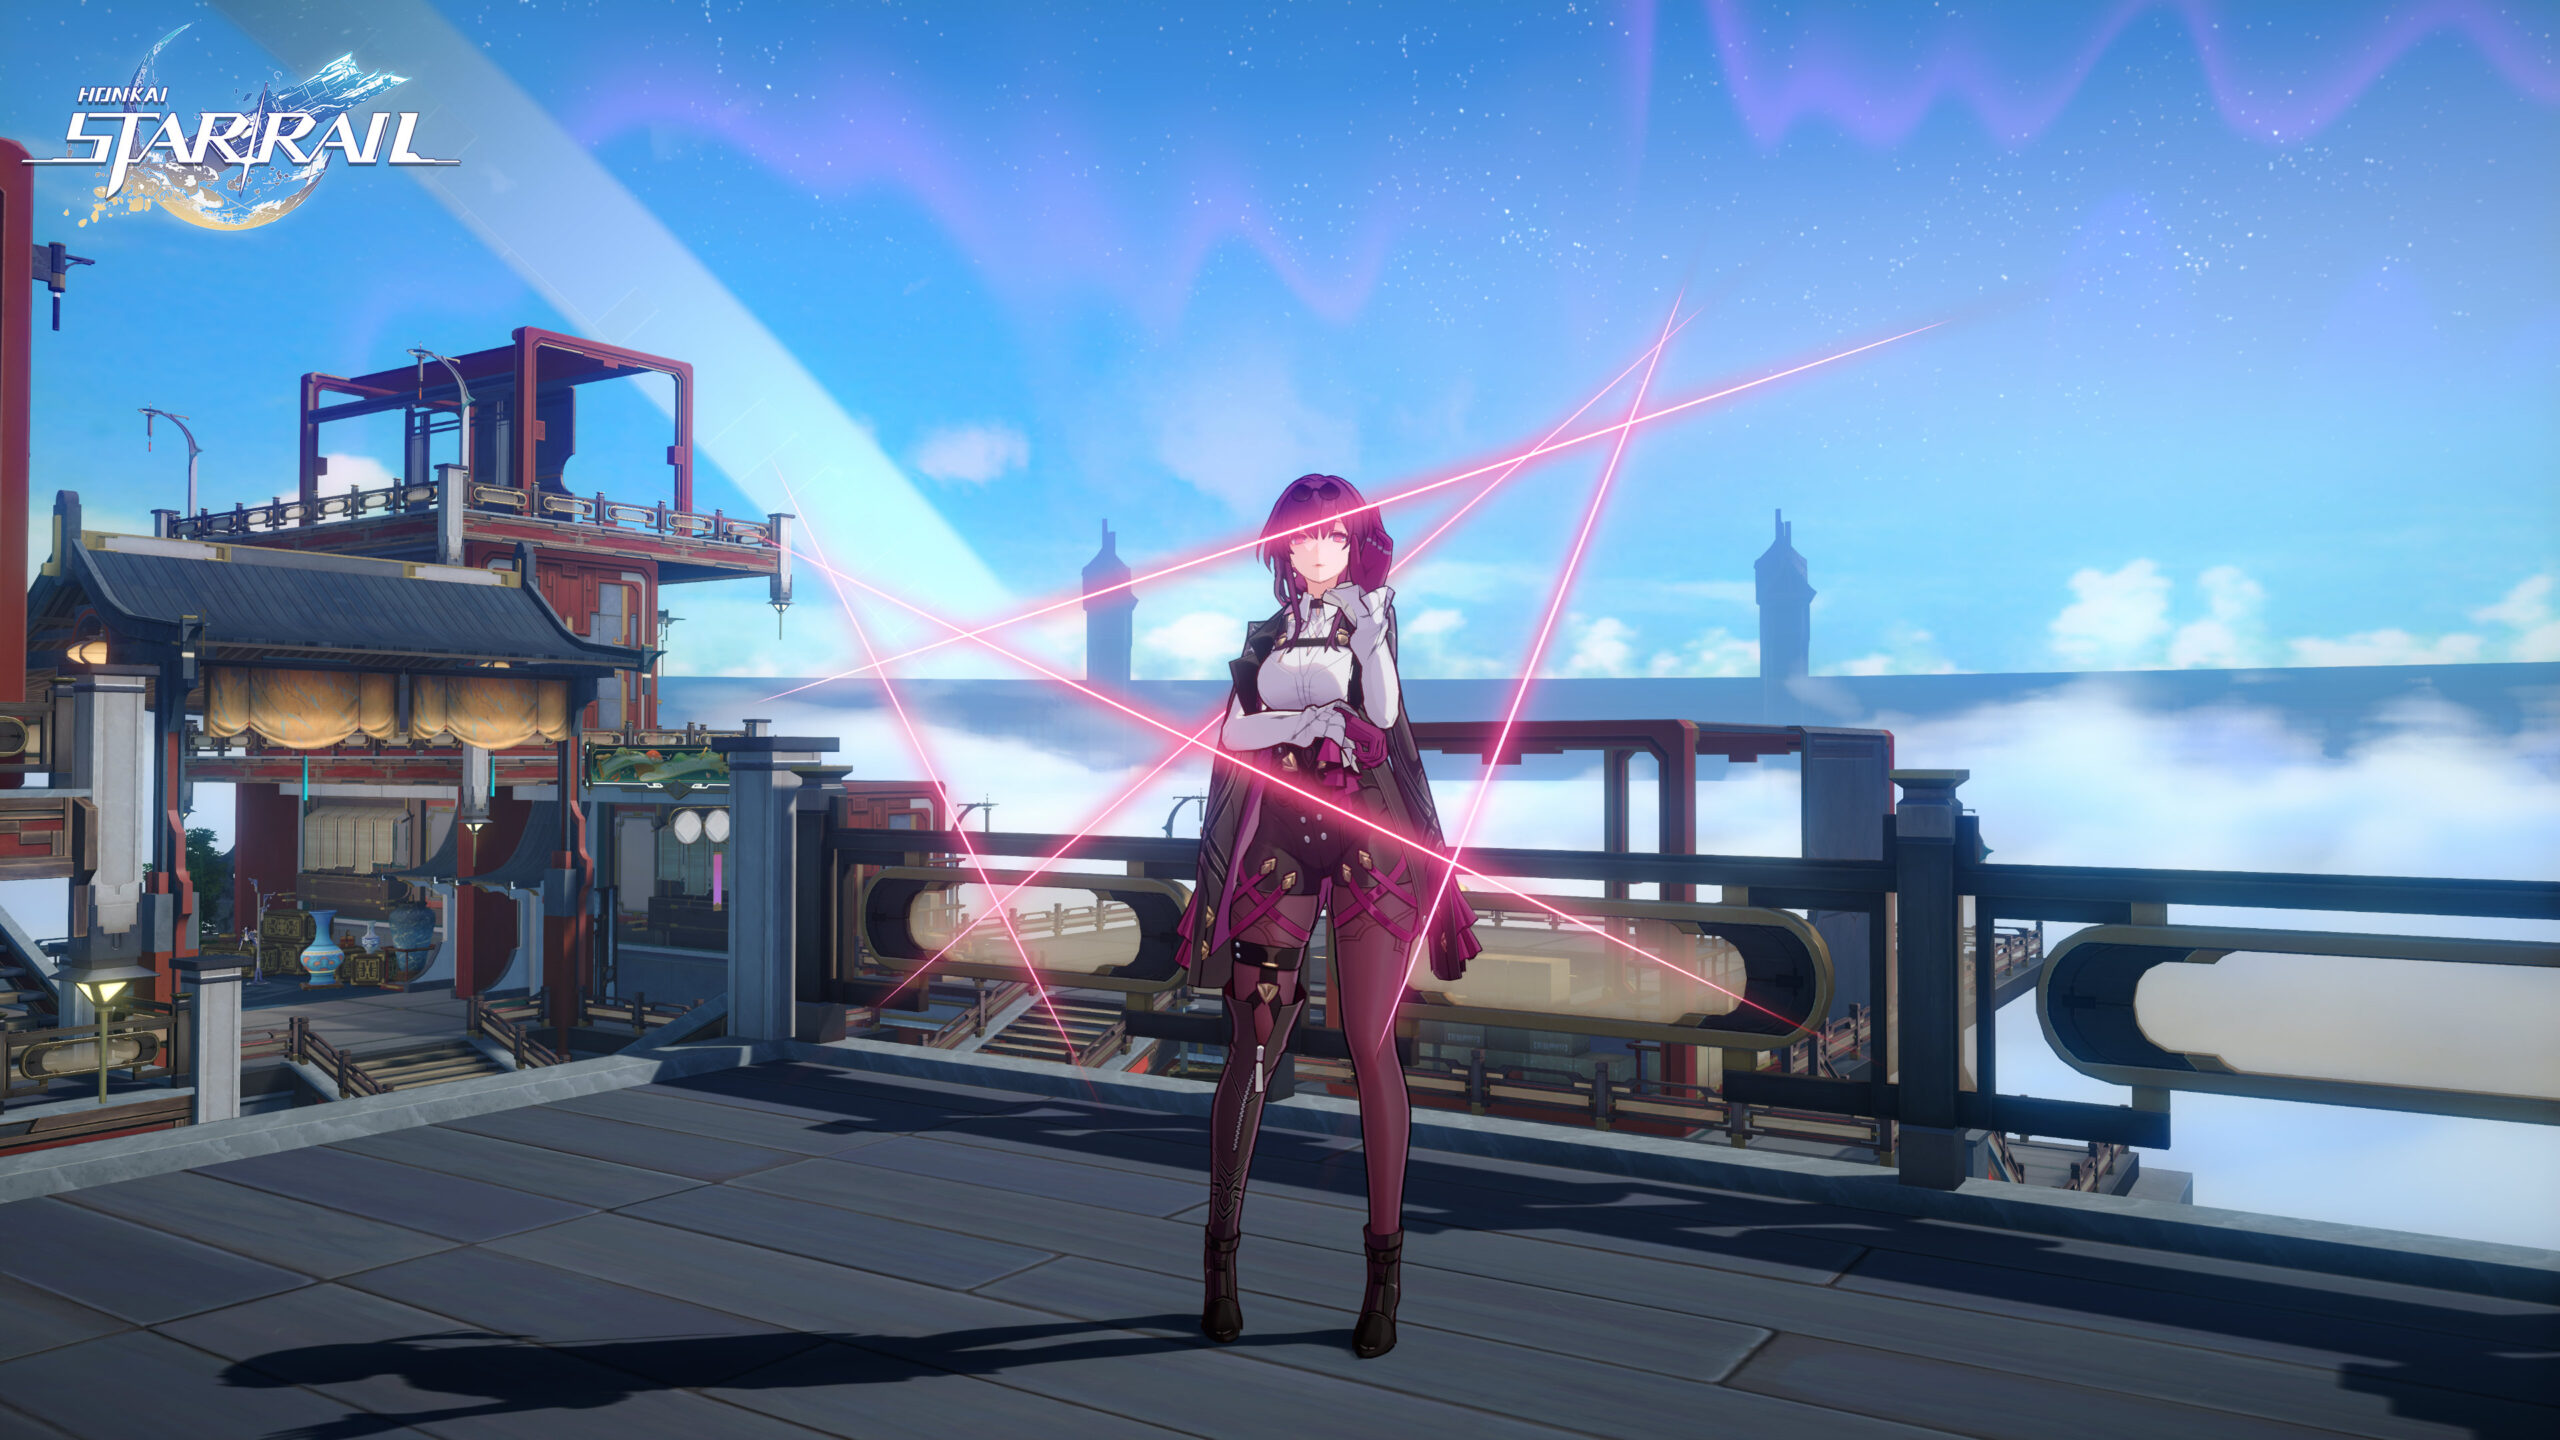 version 1.2 pre-download: How to pre-install Honkai Star Rail version 1.2?  Download size and more